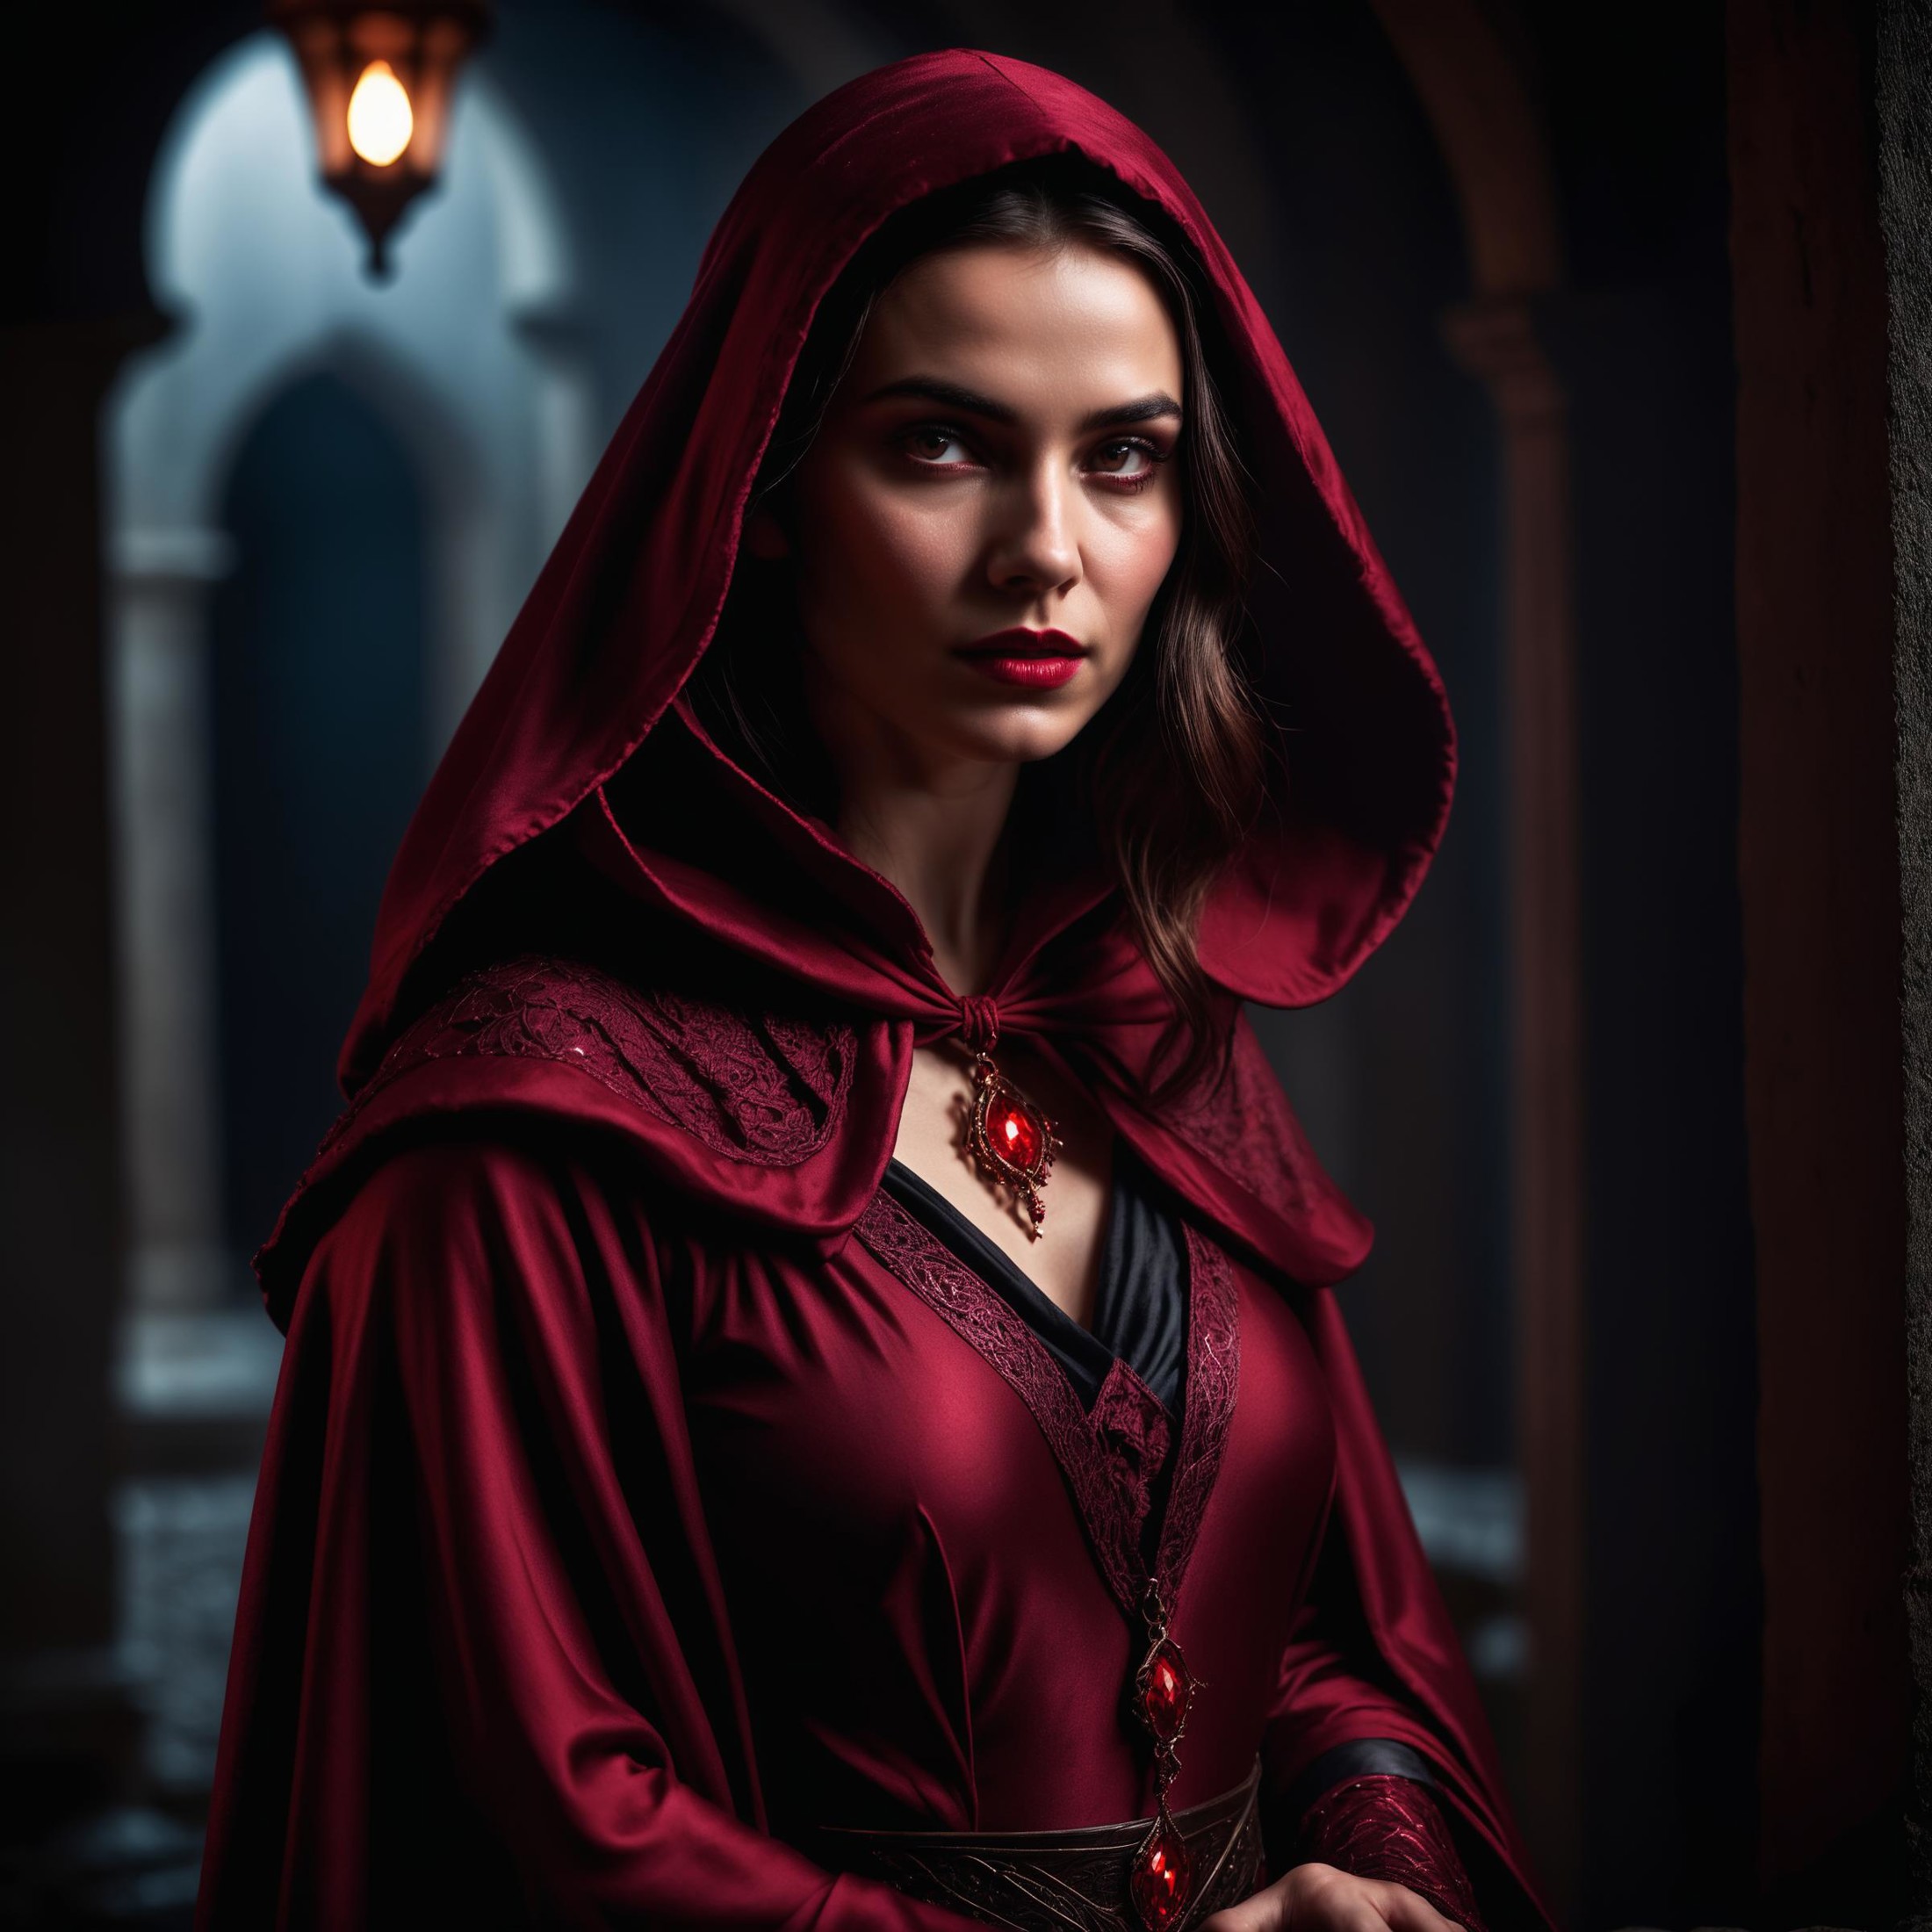 A Photograph of a young mage woman in a dark and sinister setting, enveloped in moody shadows and dressed in deep crimson ...